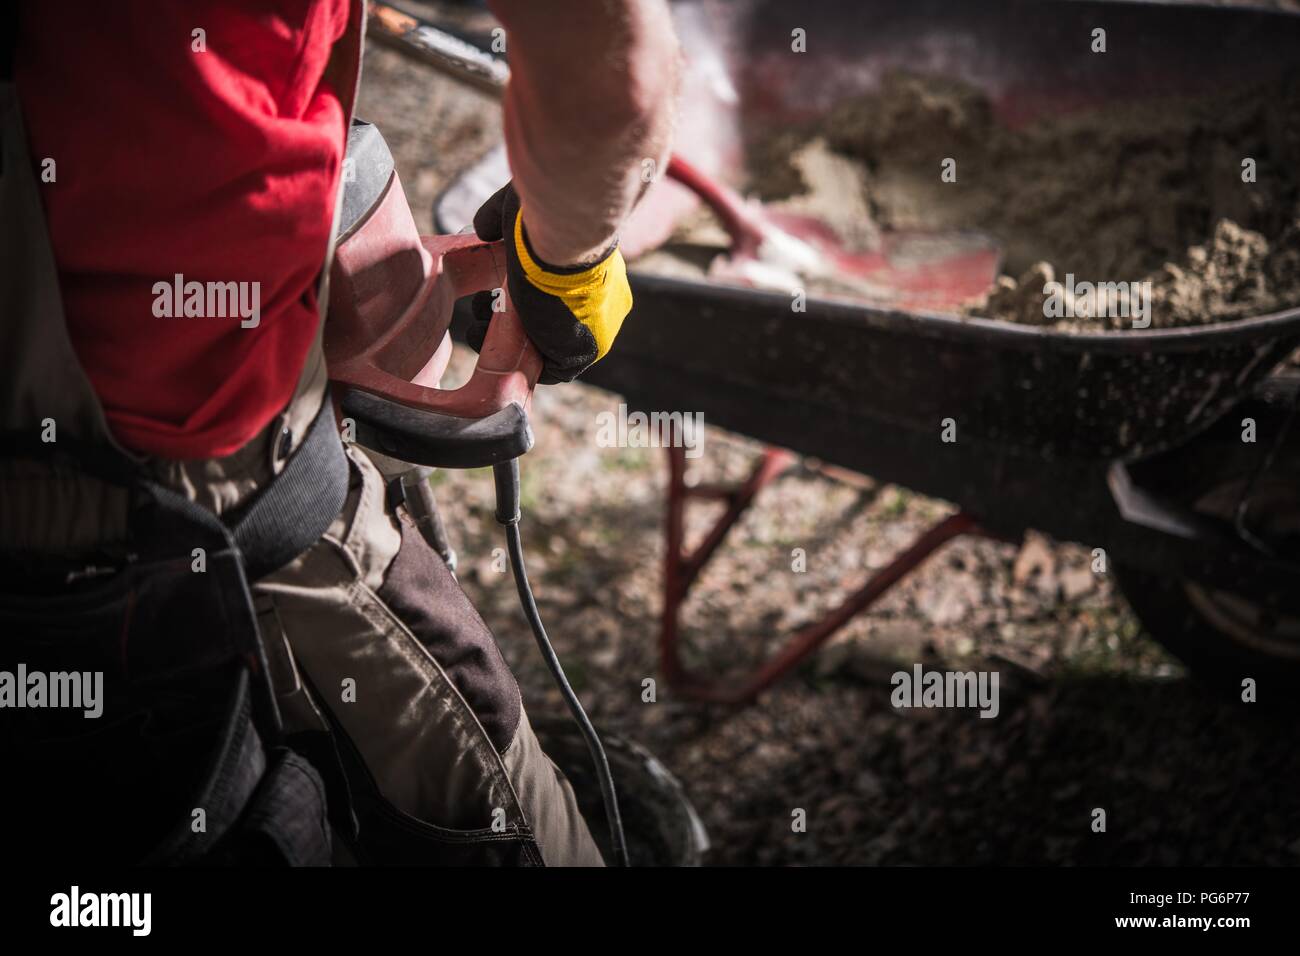 House Building Crew in Action. Caucasian Contractor Mixing Concrete with Power Tool. Stock Photo